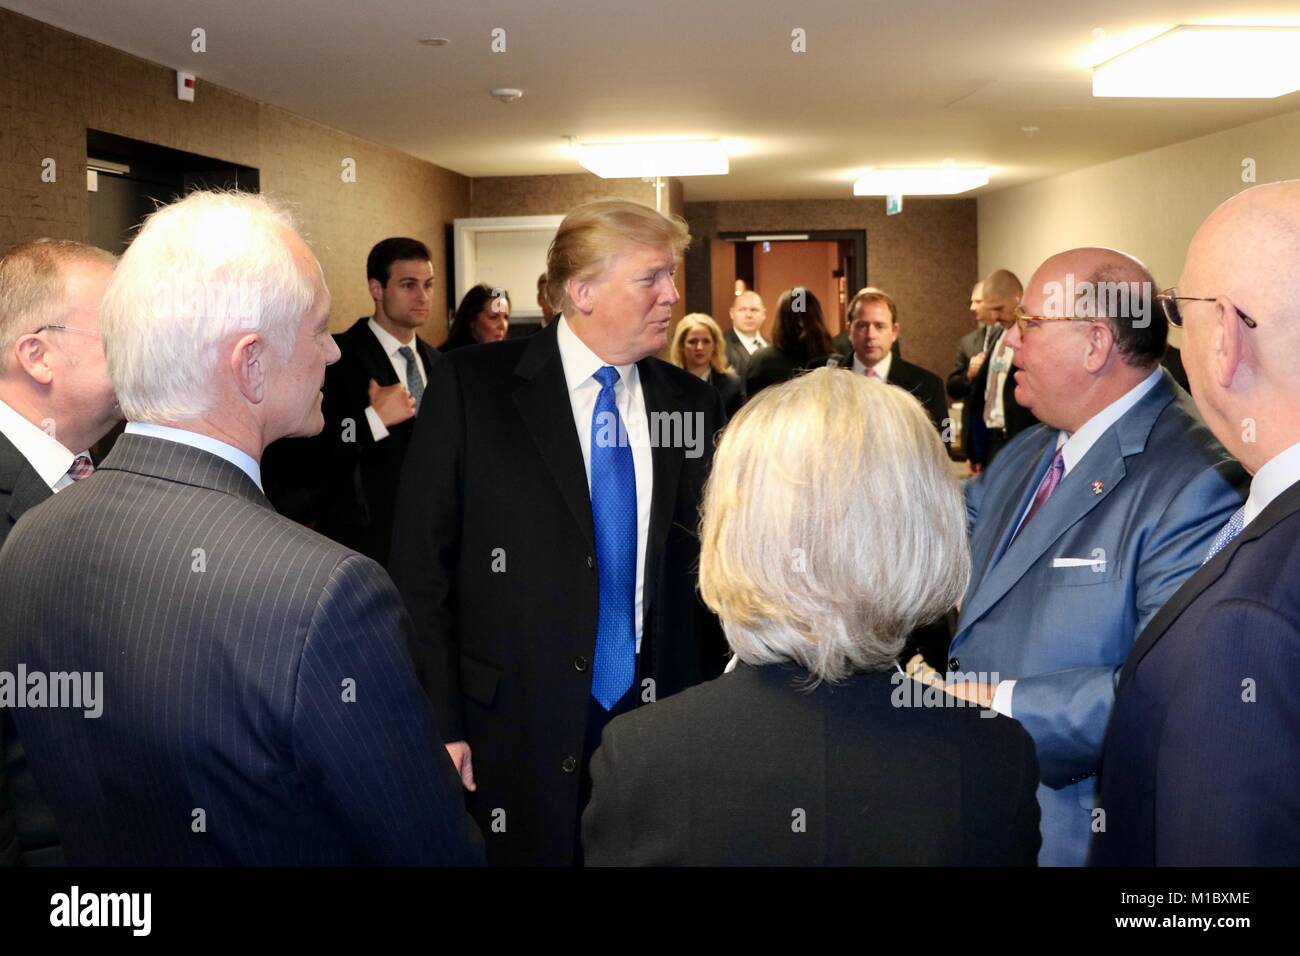 U.S President Donald Trump chats with U.S. Ambassador to Switzerland Ed McMullen, right, along with WEF Chairman Klaus Schwab, Hilde Schwab, Davos Mayor Tarzisius Caviezel, WEF Managing Director Alois Zwinggi look on as he arrives to attend the World Economic Forum January 25, 2018 in Davos, Switzerland. Stock Photo